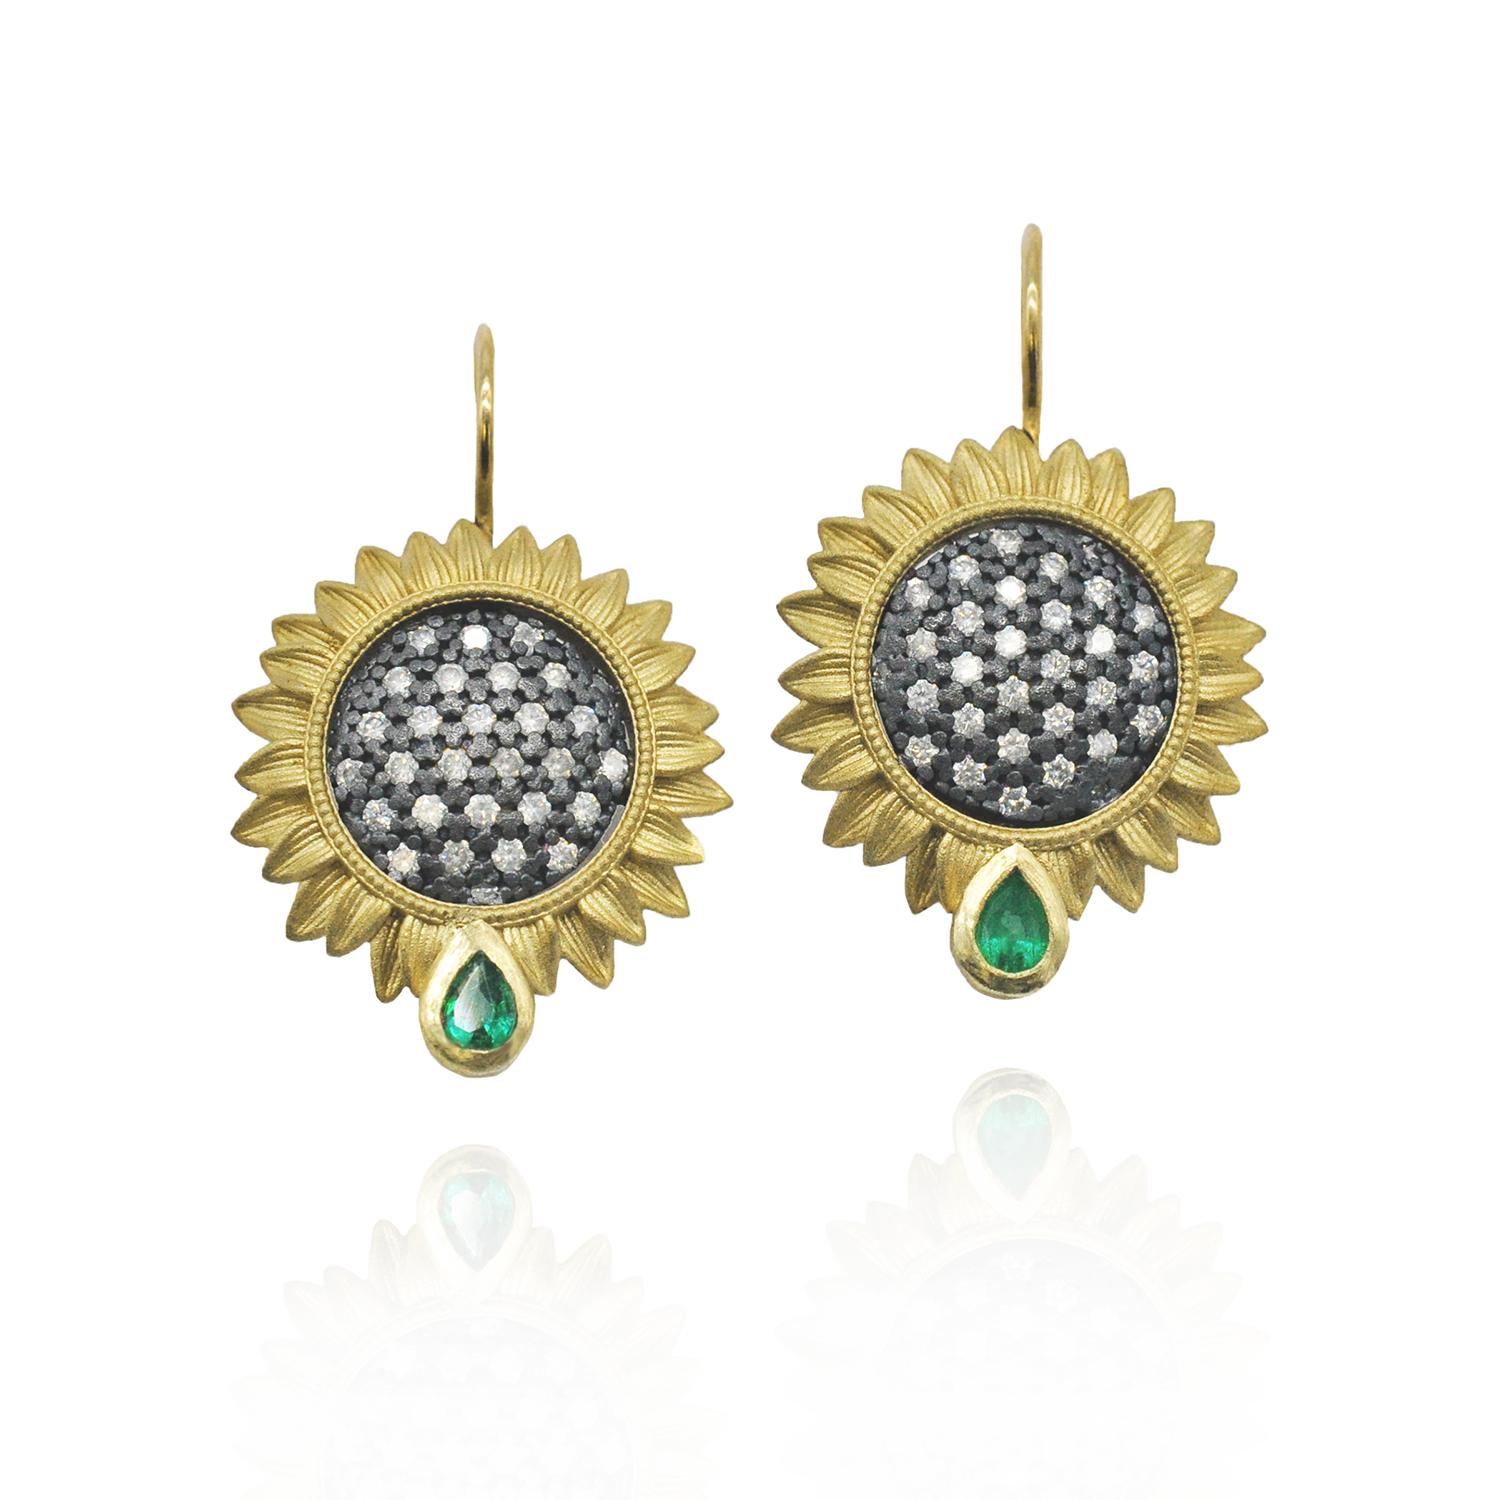 Artisan Sunflower Earrings with Pave Set Diamonds in Oxidized Silver with Emeralds, Med For Sale